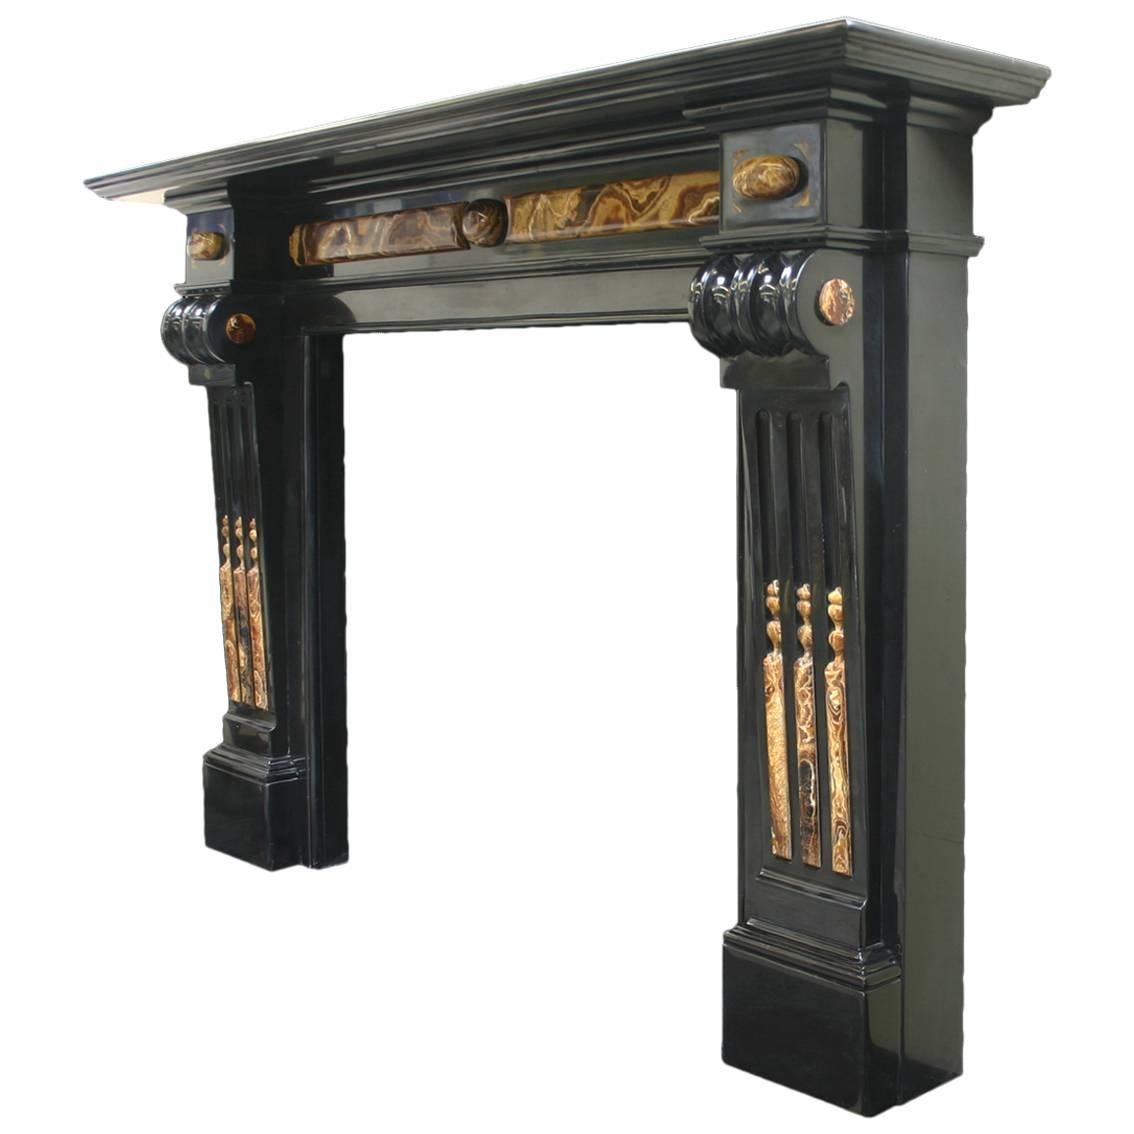 An unusual and imposing restored and polished Victorian Belgian black marble chimneypiece with carved corbels and fluted legs, the flutes decorated with onyx reeds. Onyx mounts and inlays to the frieze and capitals, circa 1890.

Measures: Shelf